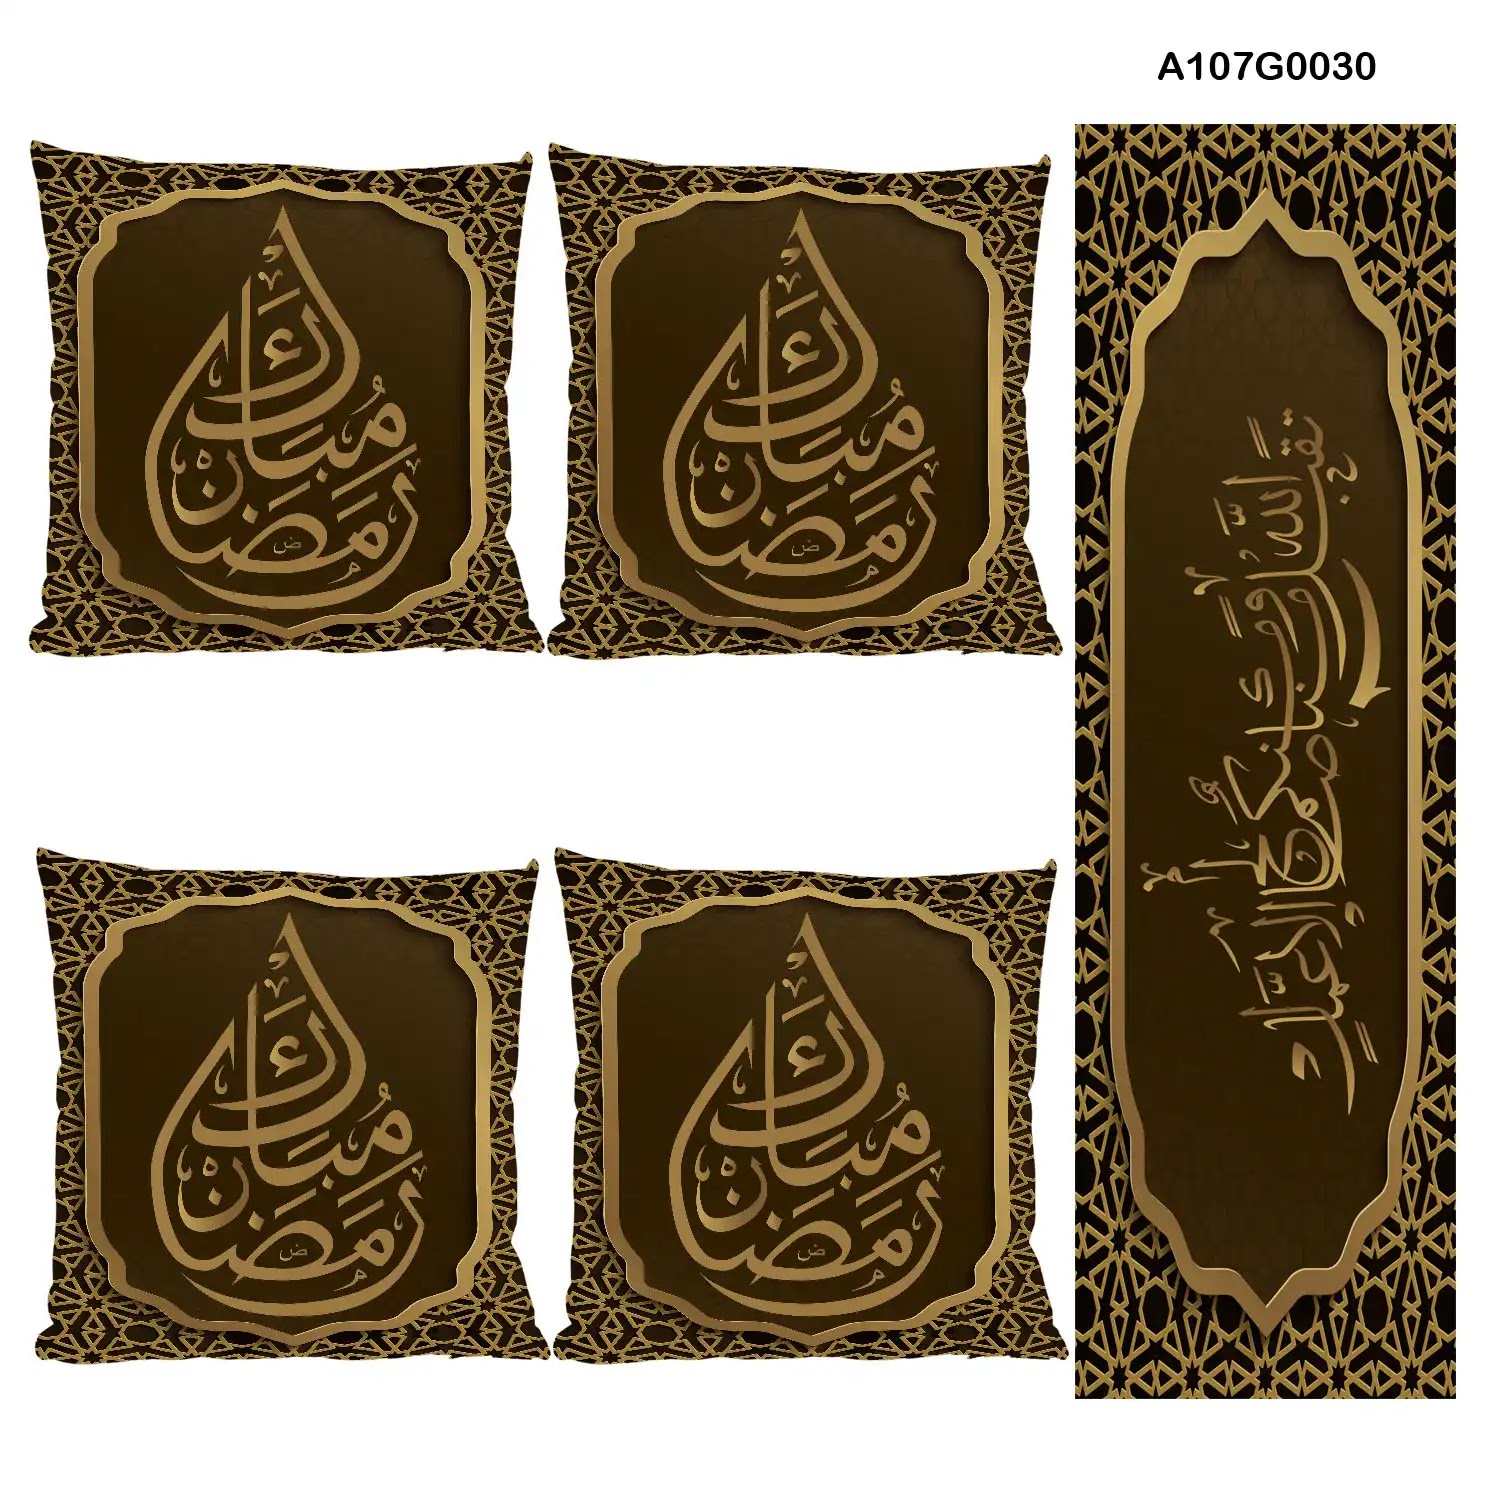 Gold and brown Pillow cover set & table runner for Ramadan